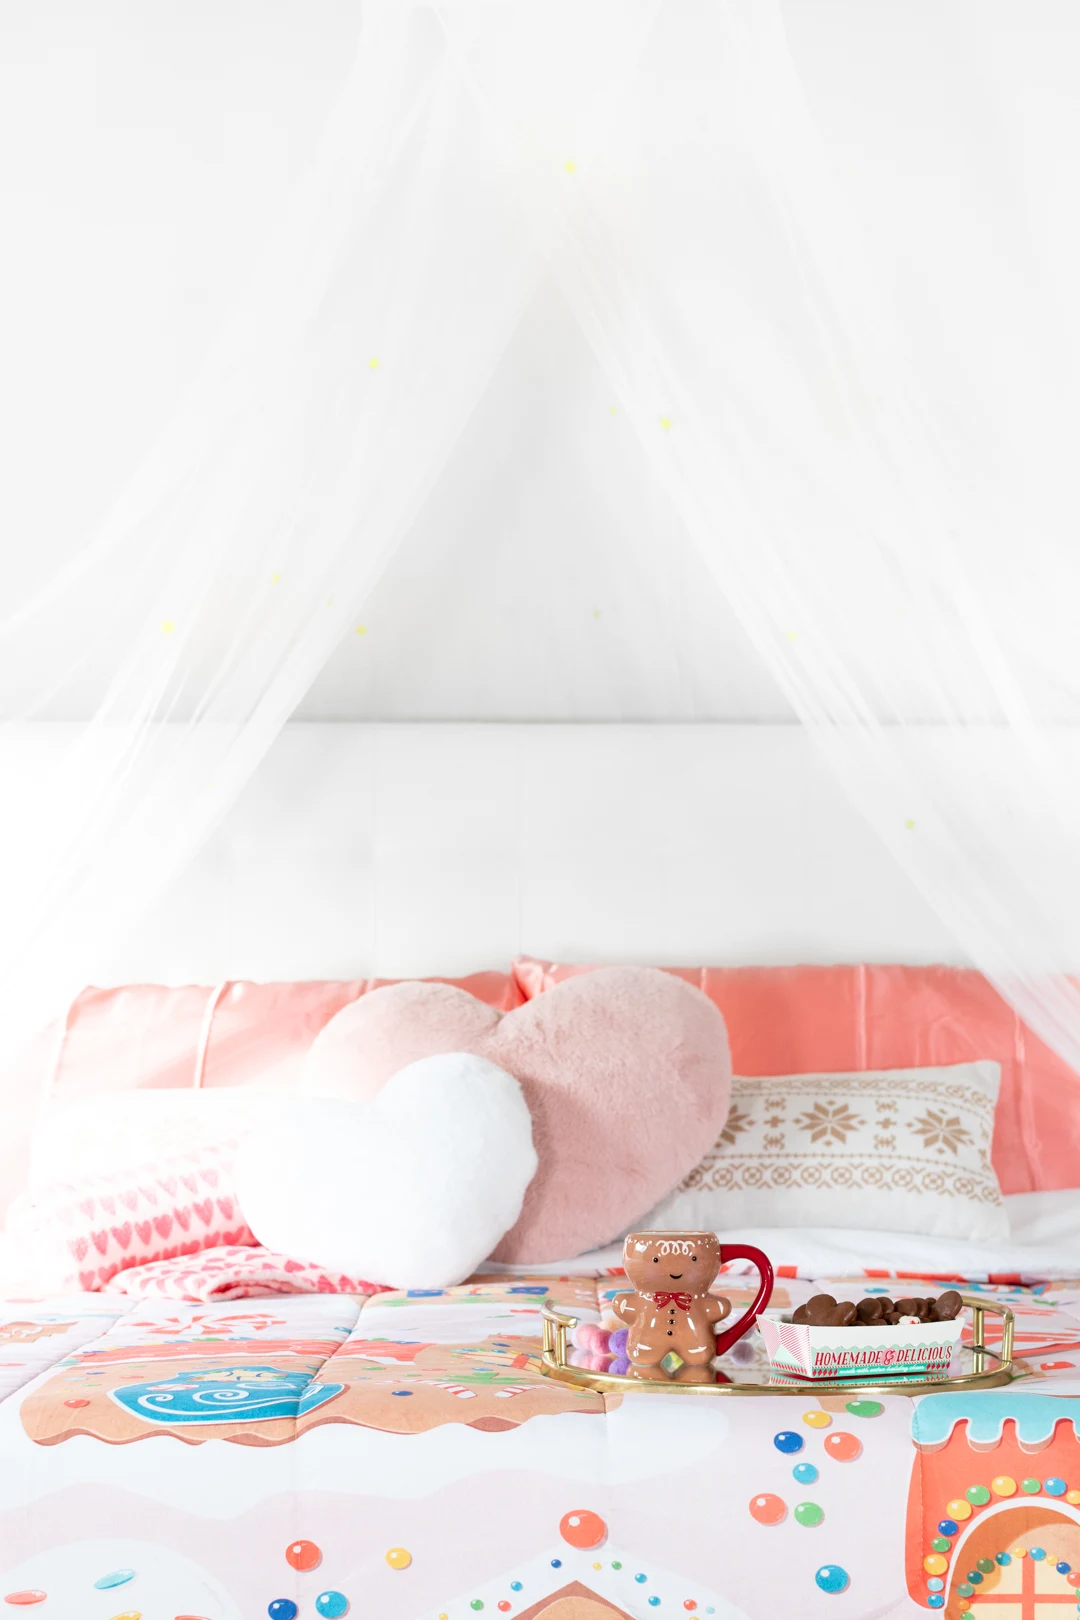 cozy christmas bedroom setup with heart-shaped pillows, gingerbread blankets and pretty tent.